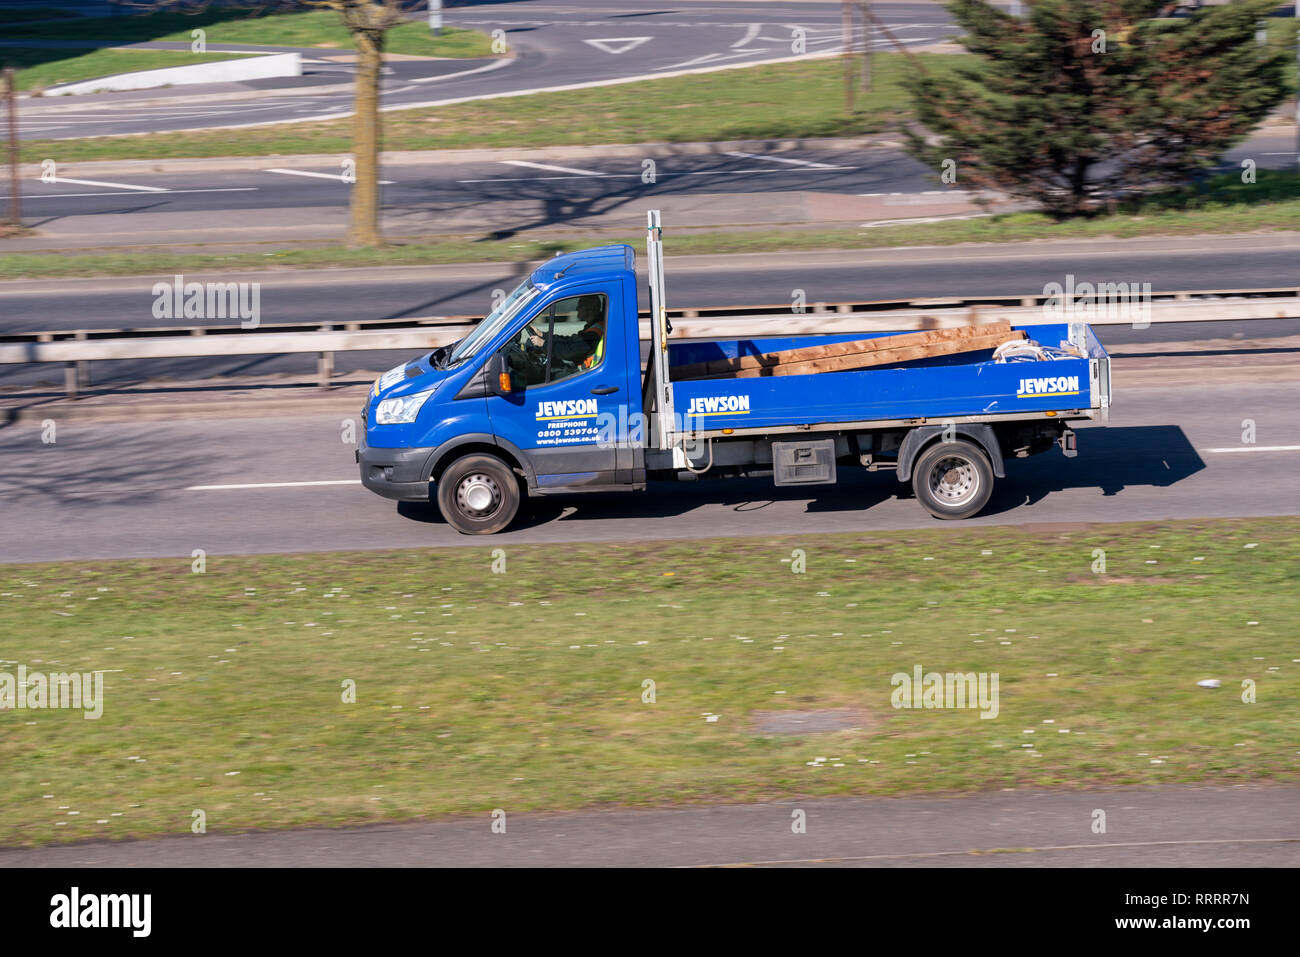 Jewson builder's merchant truck, lorry, vehicle. Carrying timber. Delivery vehicle Stock Photo